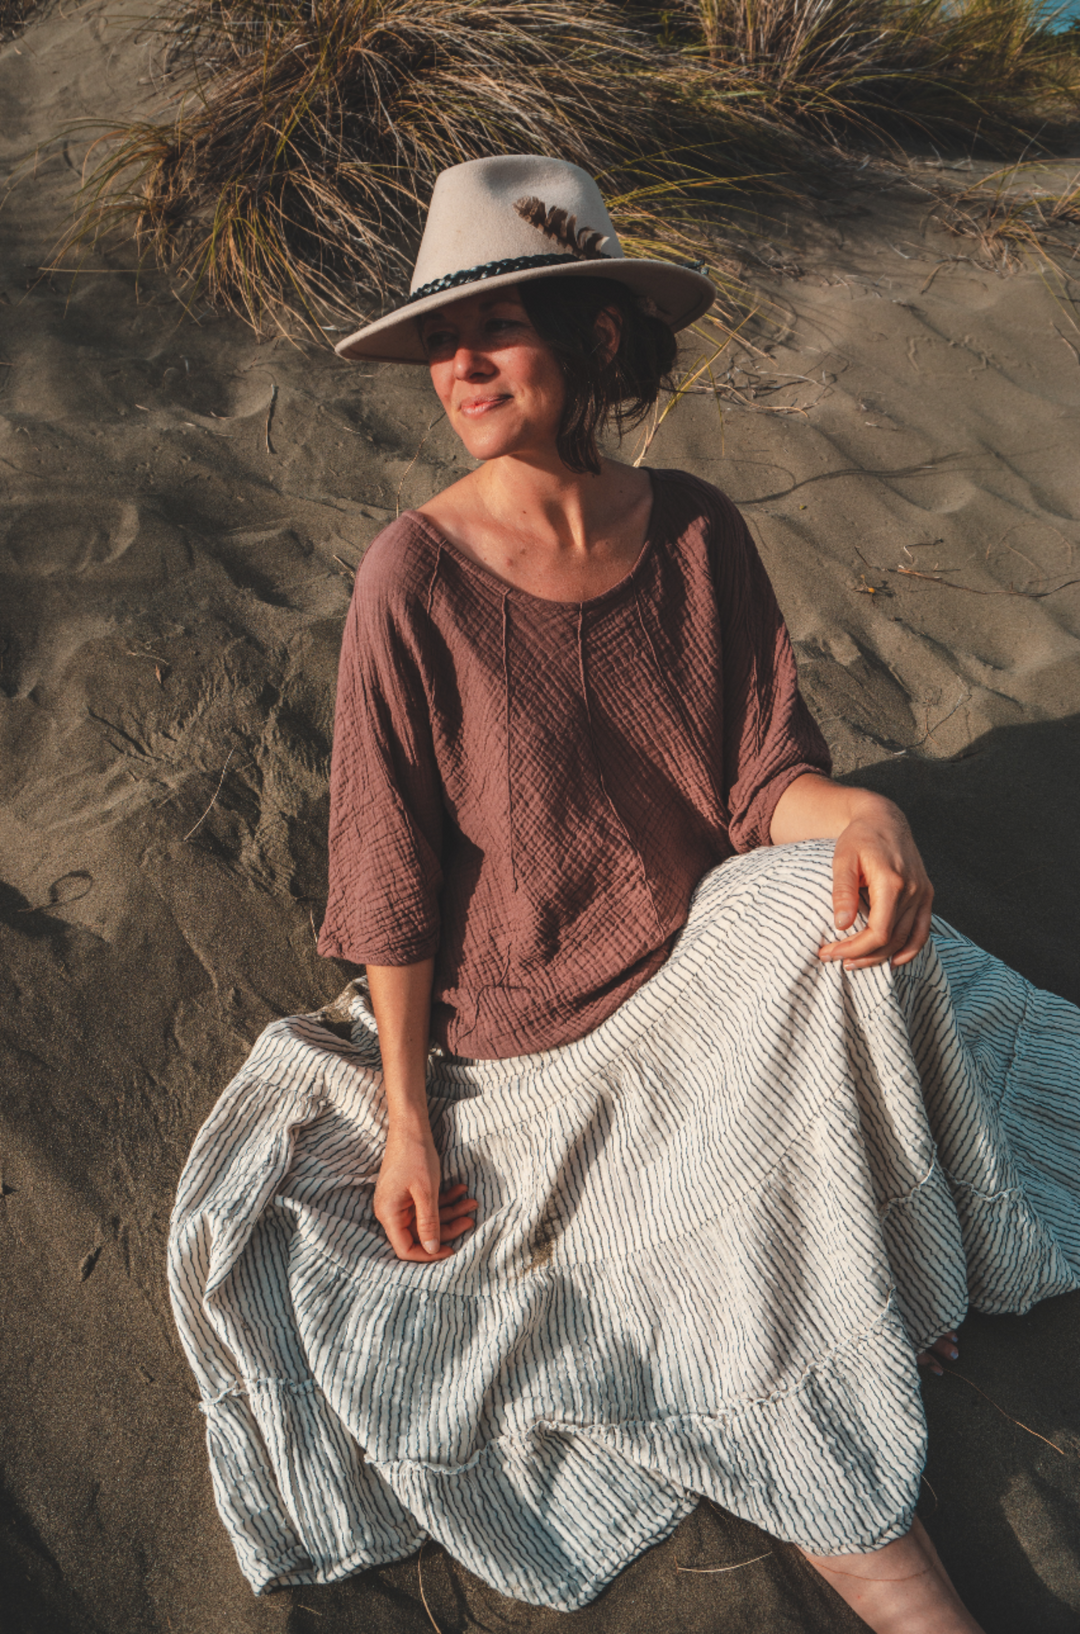 Model sits on sand dune in a tan hat, rose-color top and pinstriped skirt.